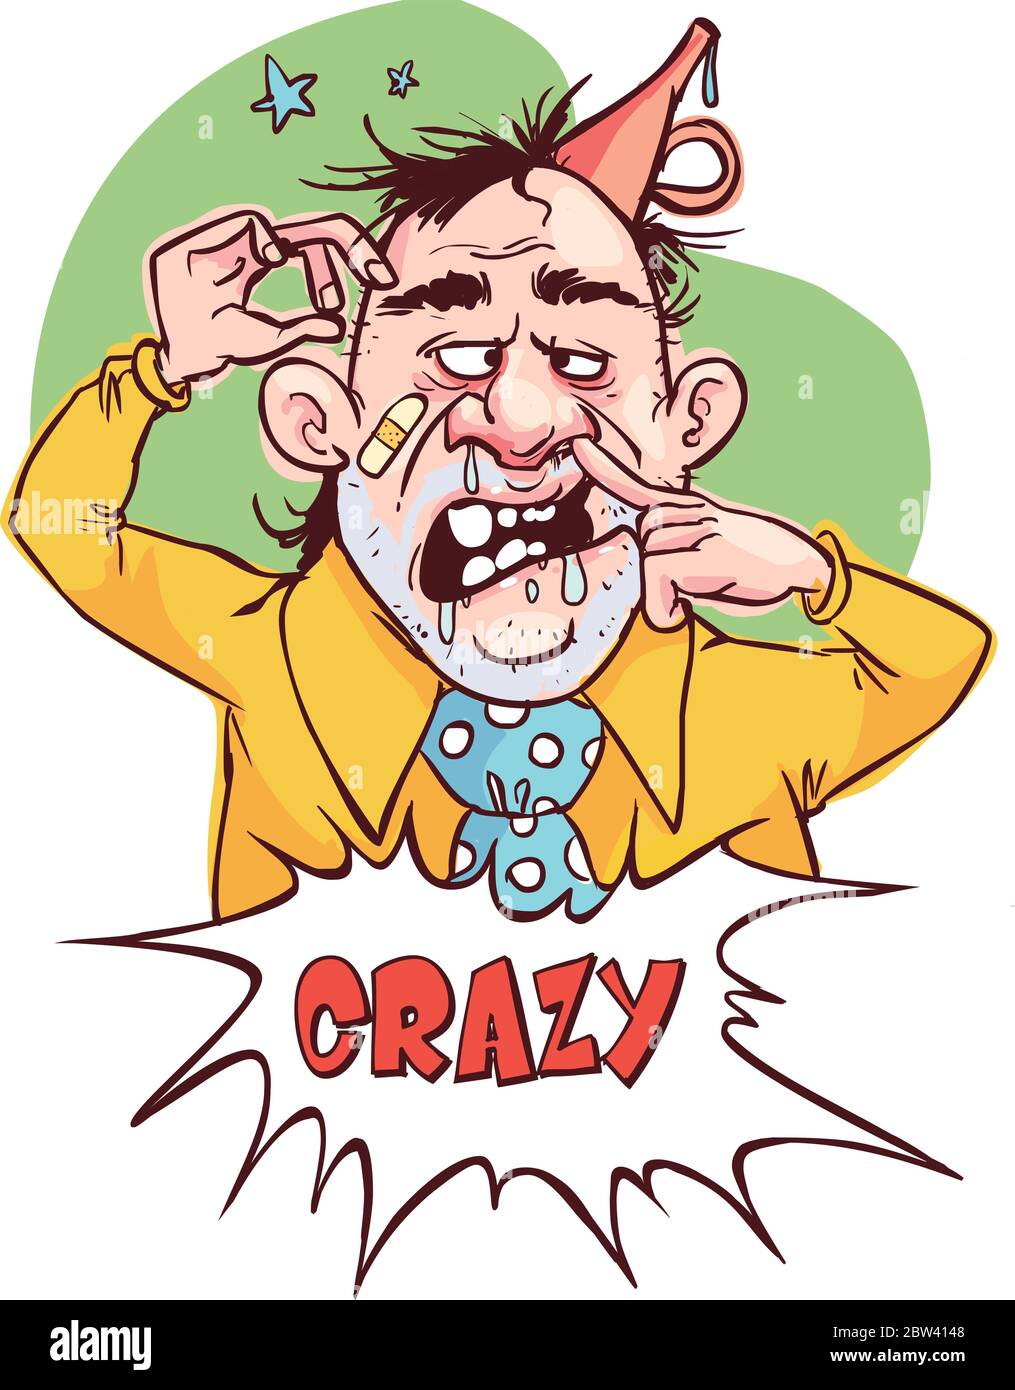 A Crazy Person In Vector Stock Illustration Stock Vector Image Art Alamy